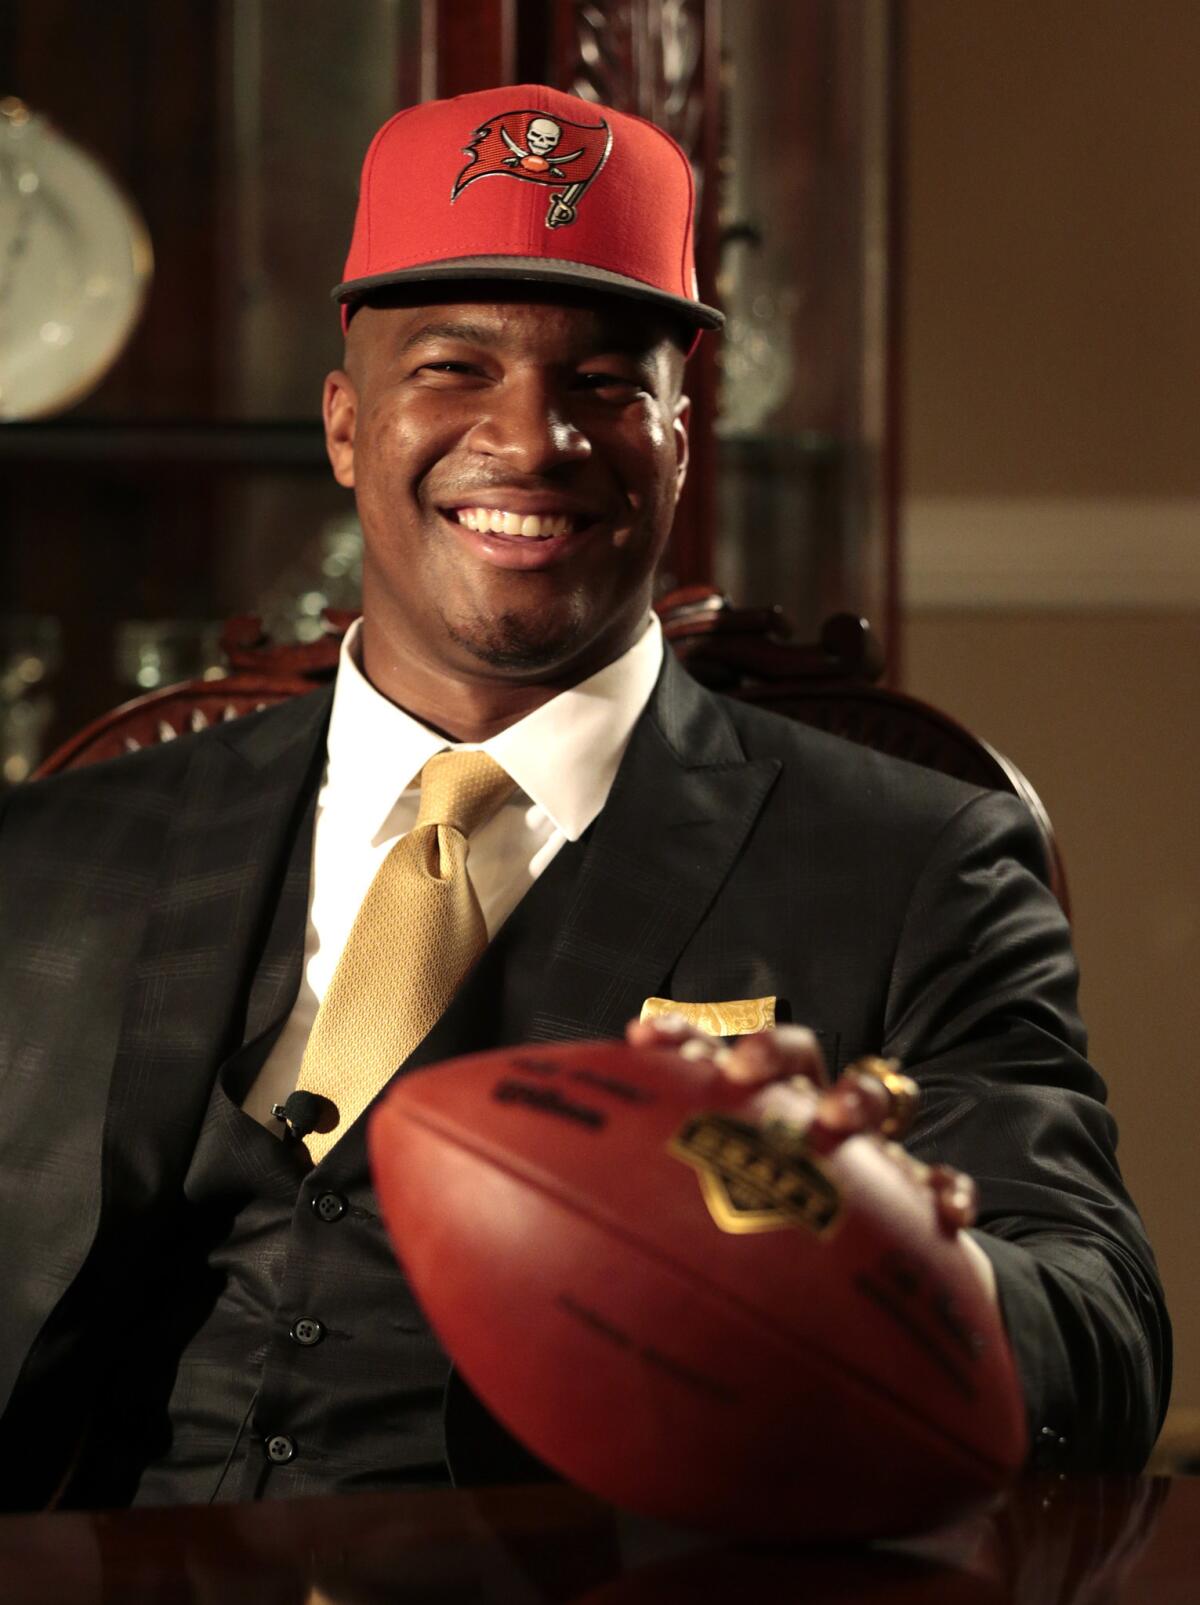 Jameis Winston wears a Buccaneers cap after being selected No. 1 overall by Tampa Bay on Thursday night.